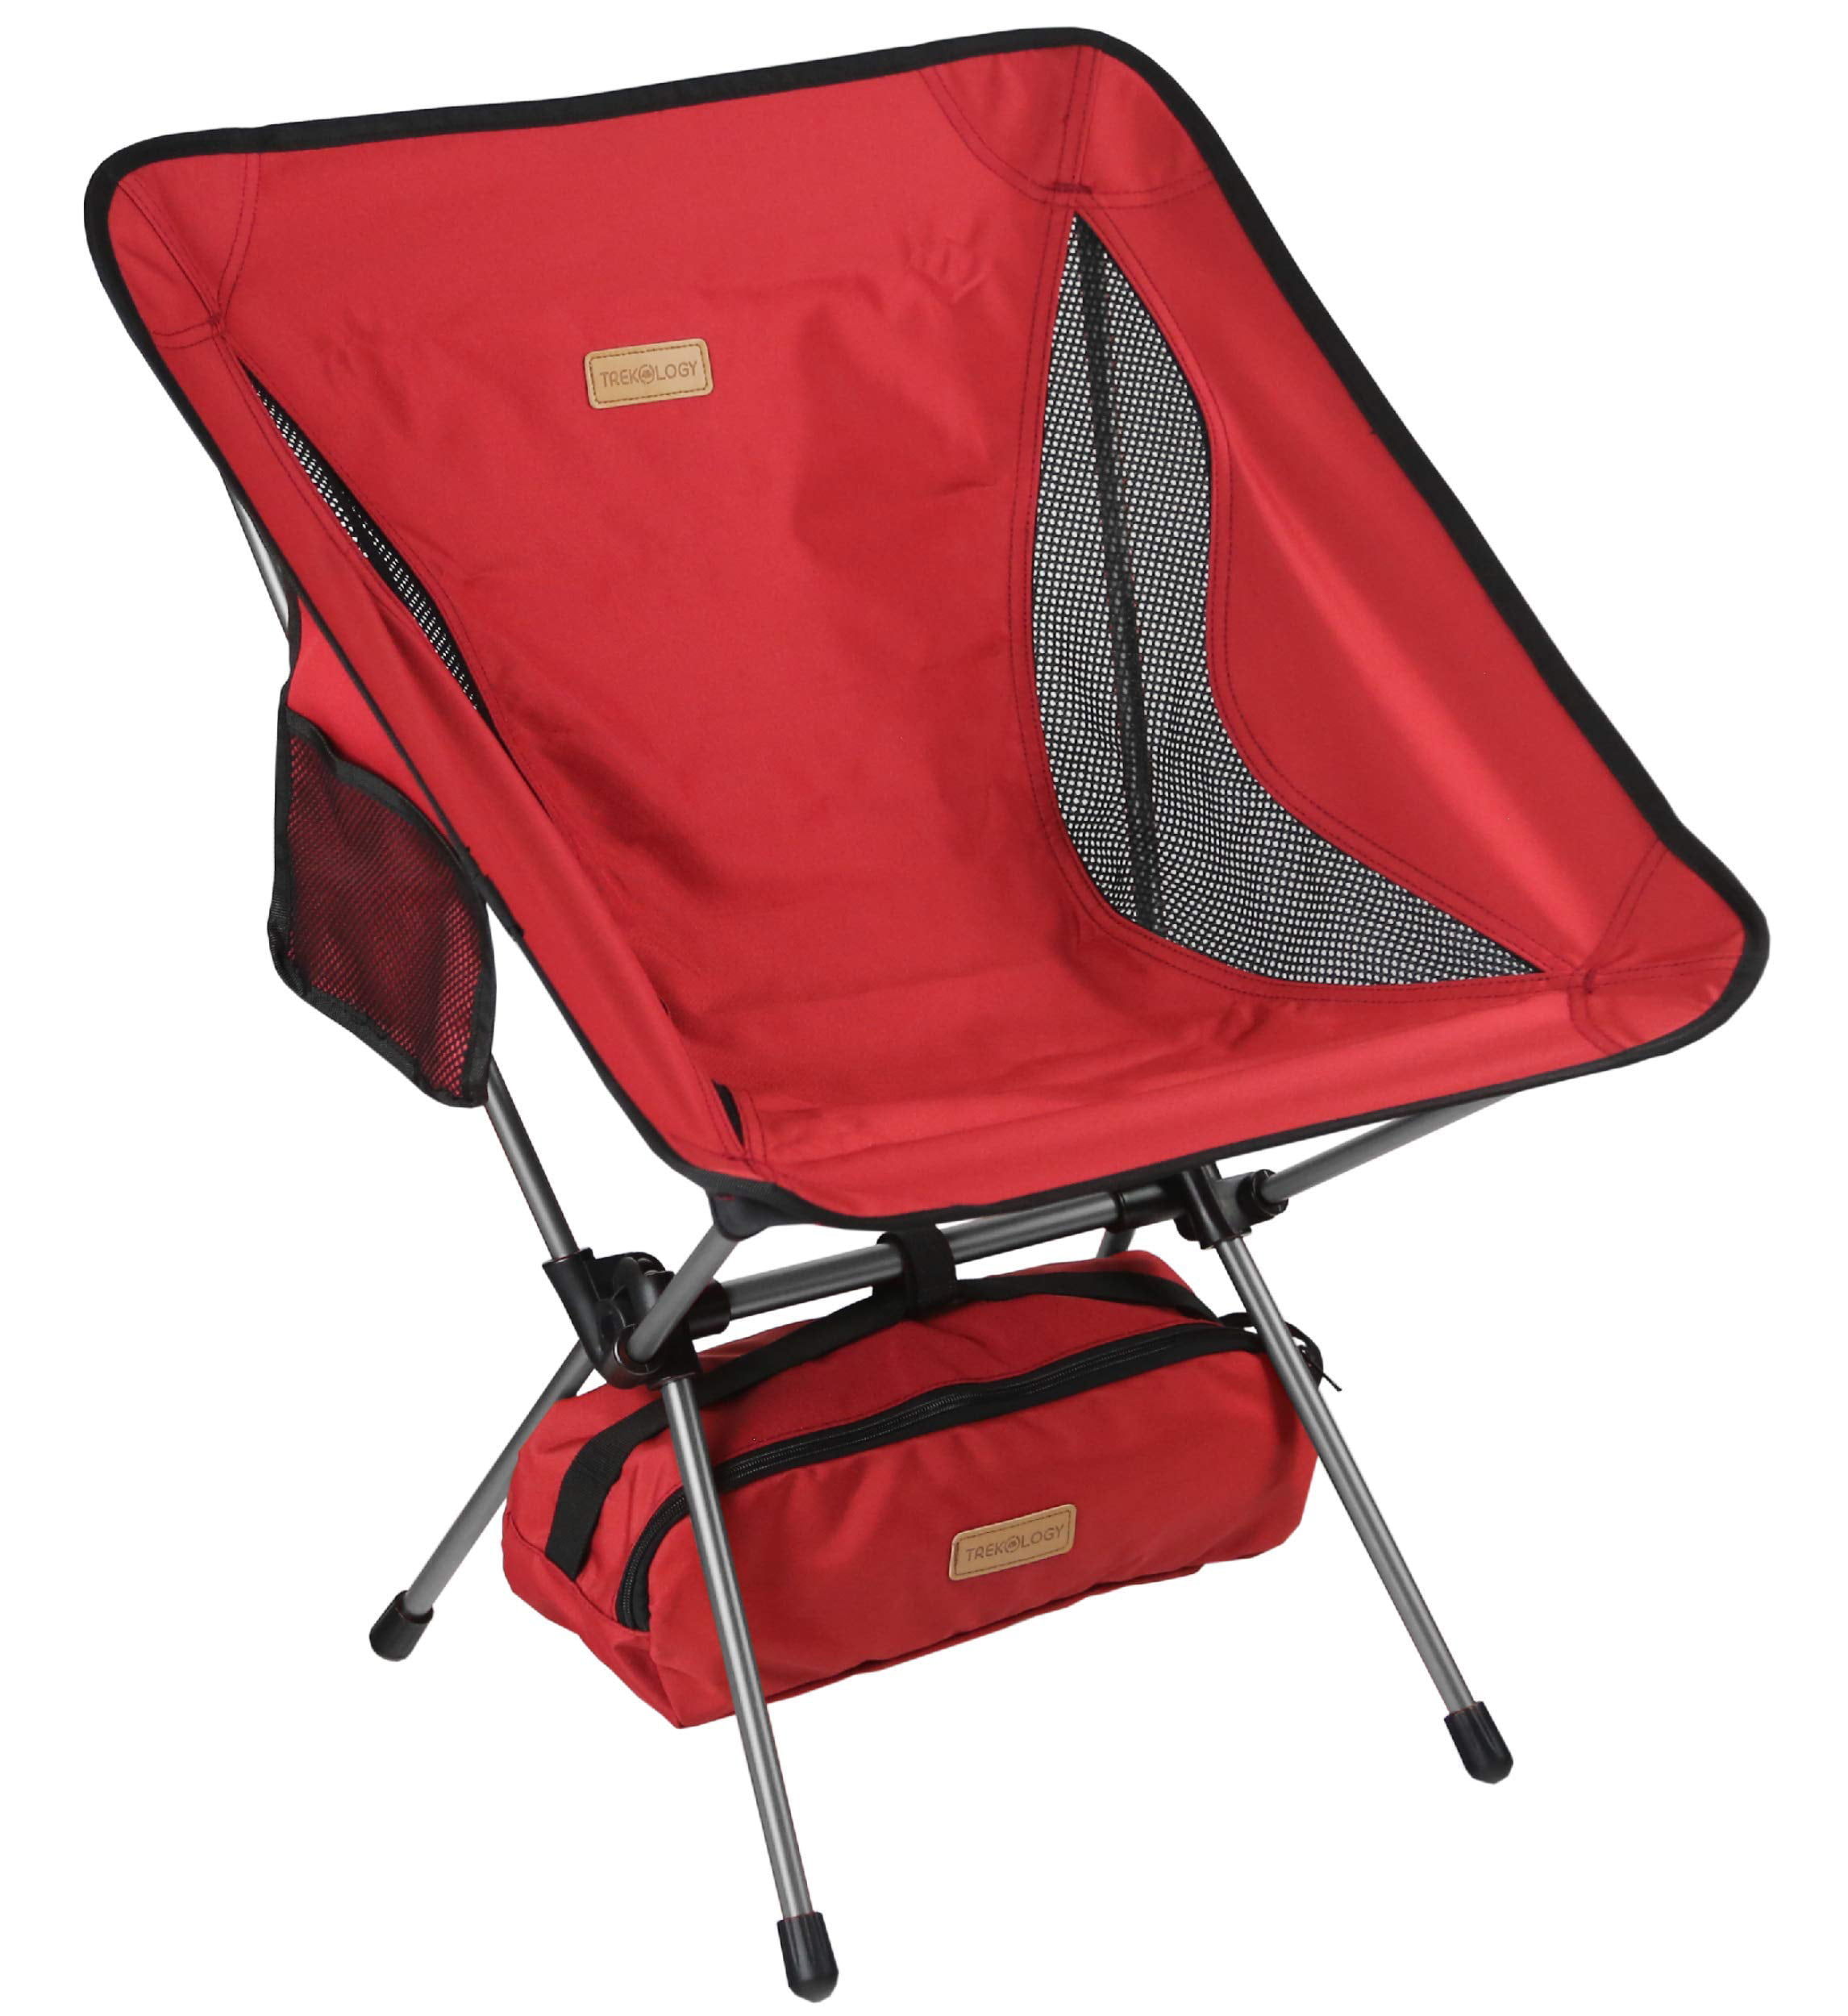 Camp Compact Ultralight Folding Backpacking Chairs in a Carry Bag Trekology YIZI Go Portable Camping Chair Adjustable Height Heavy Duty 300 lb Capacity Hiker Beach Outdoor